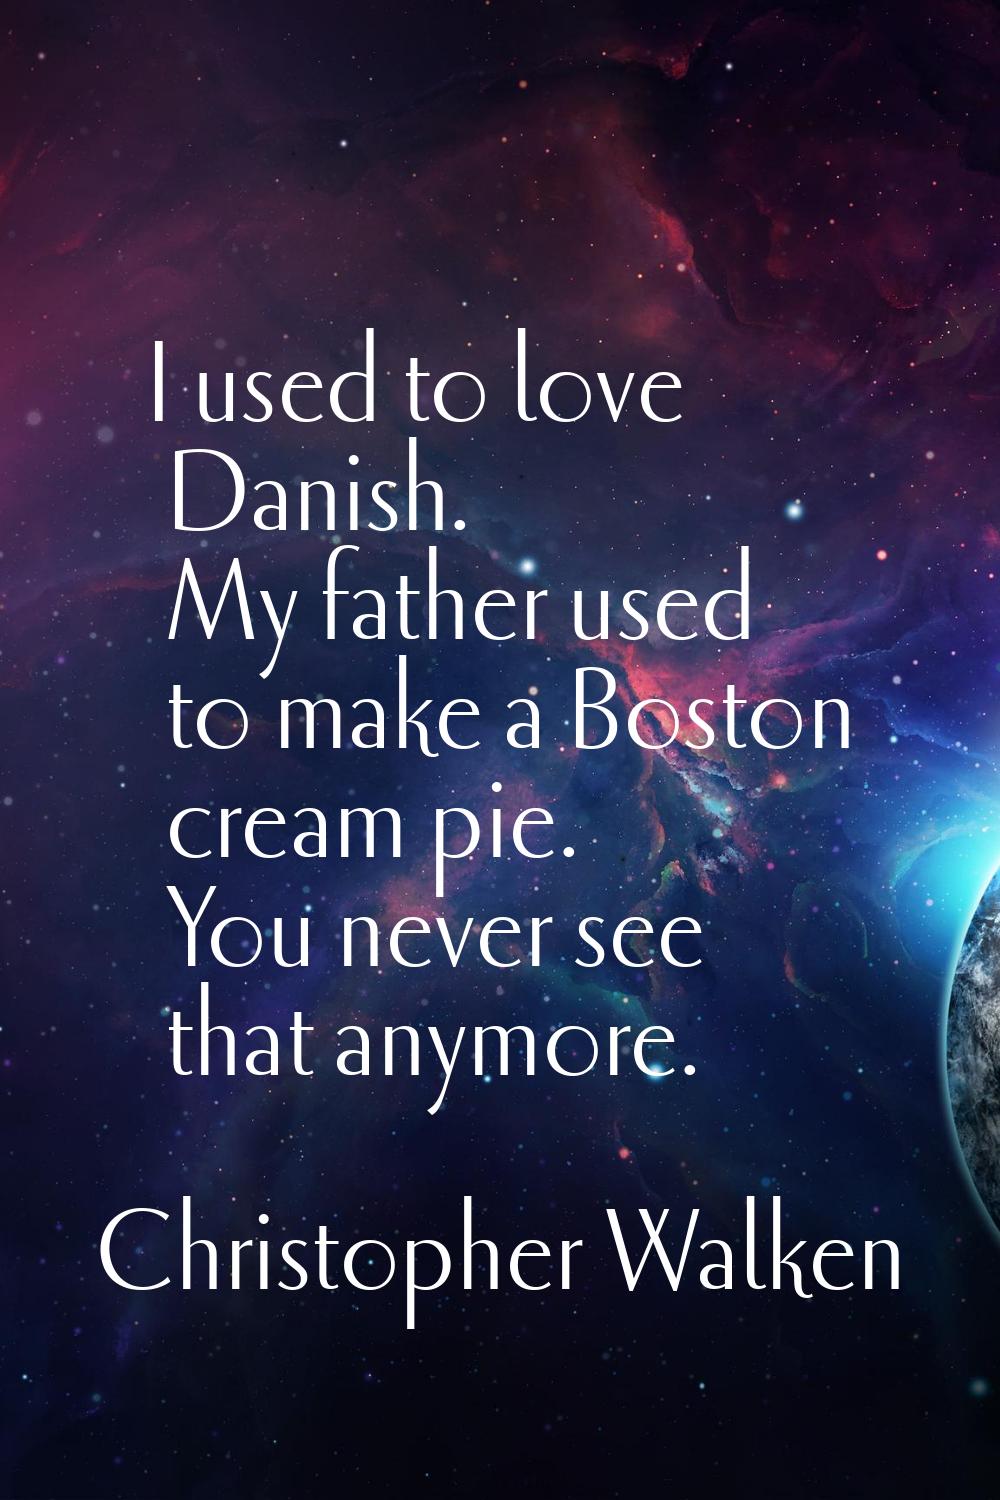 I used to love Danish. My father used to make a Boston cream pie. You never see that anymore.